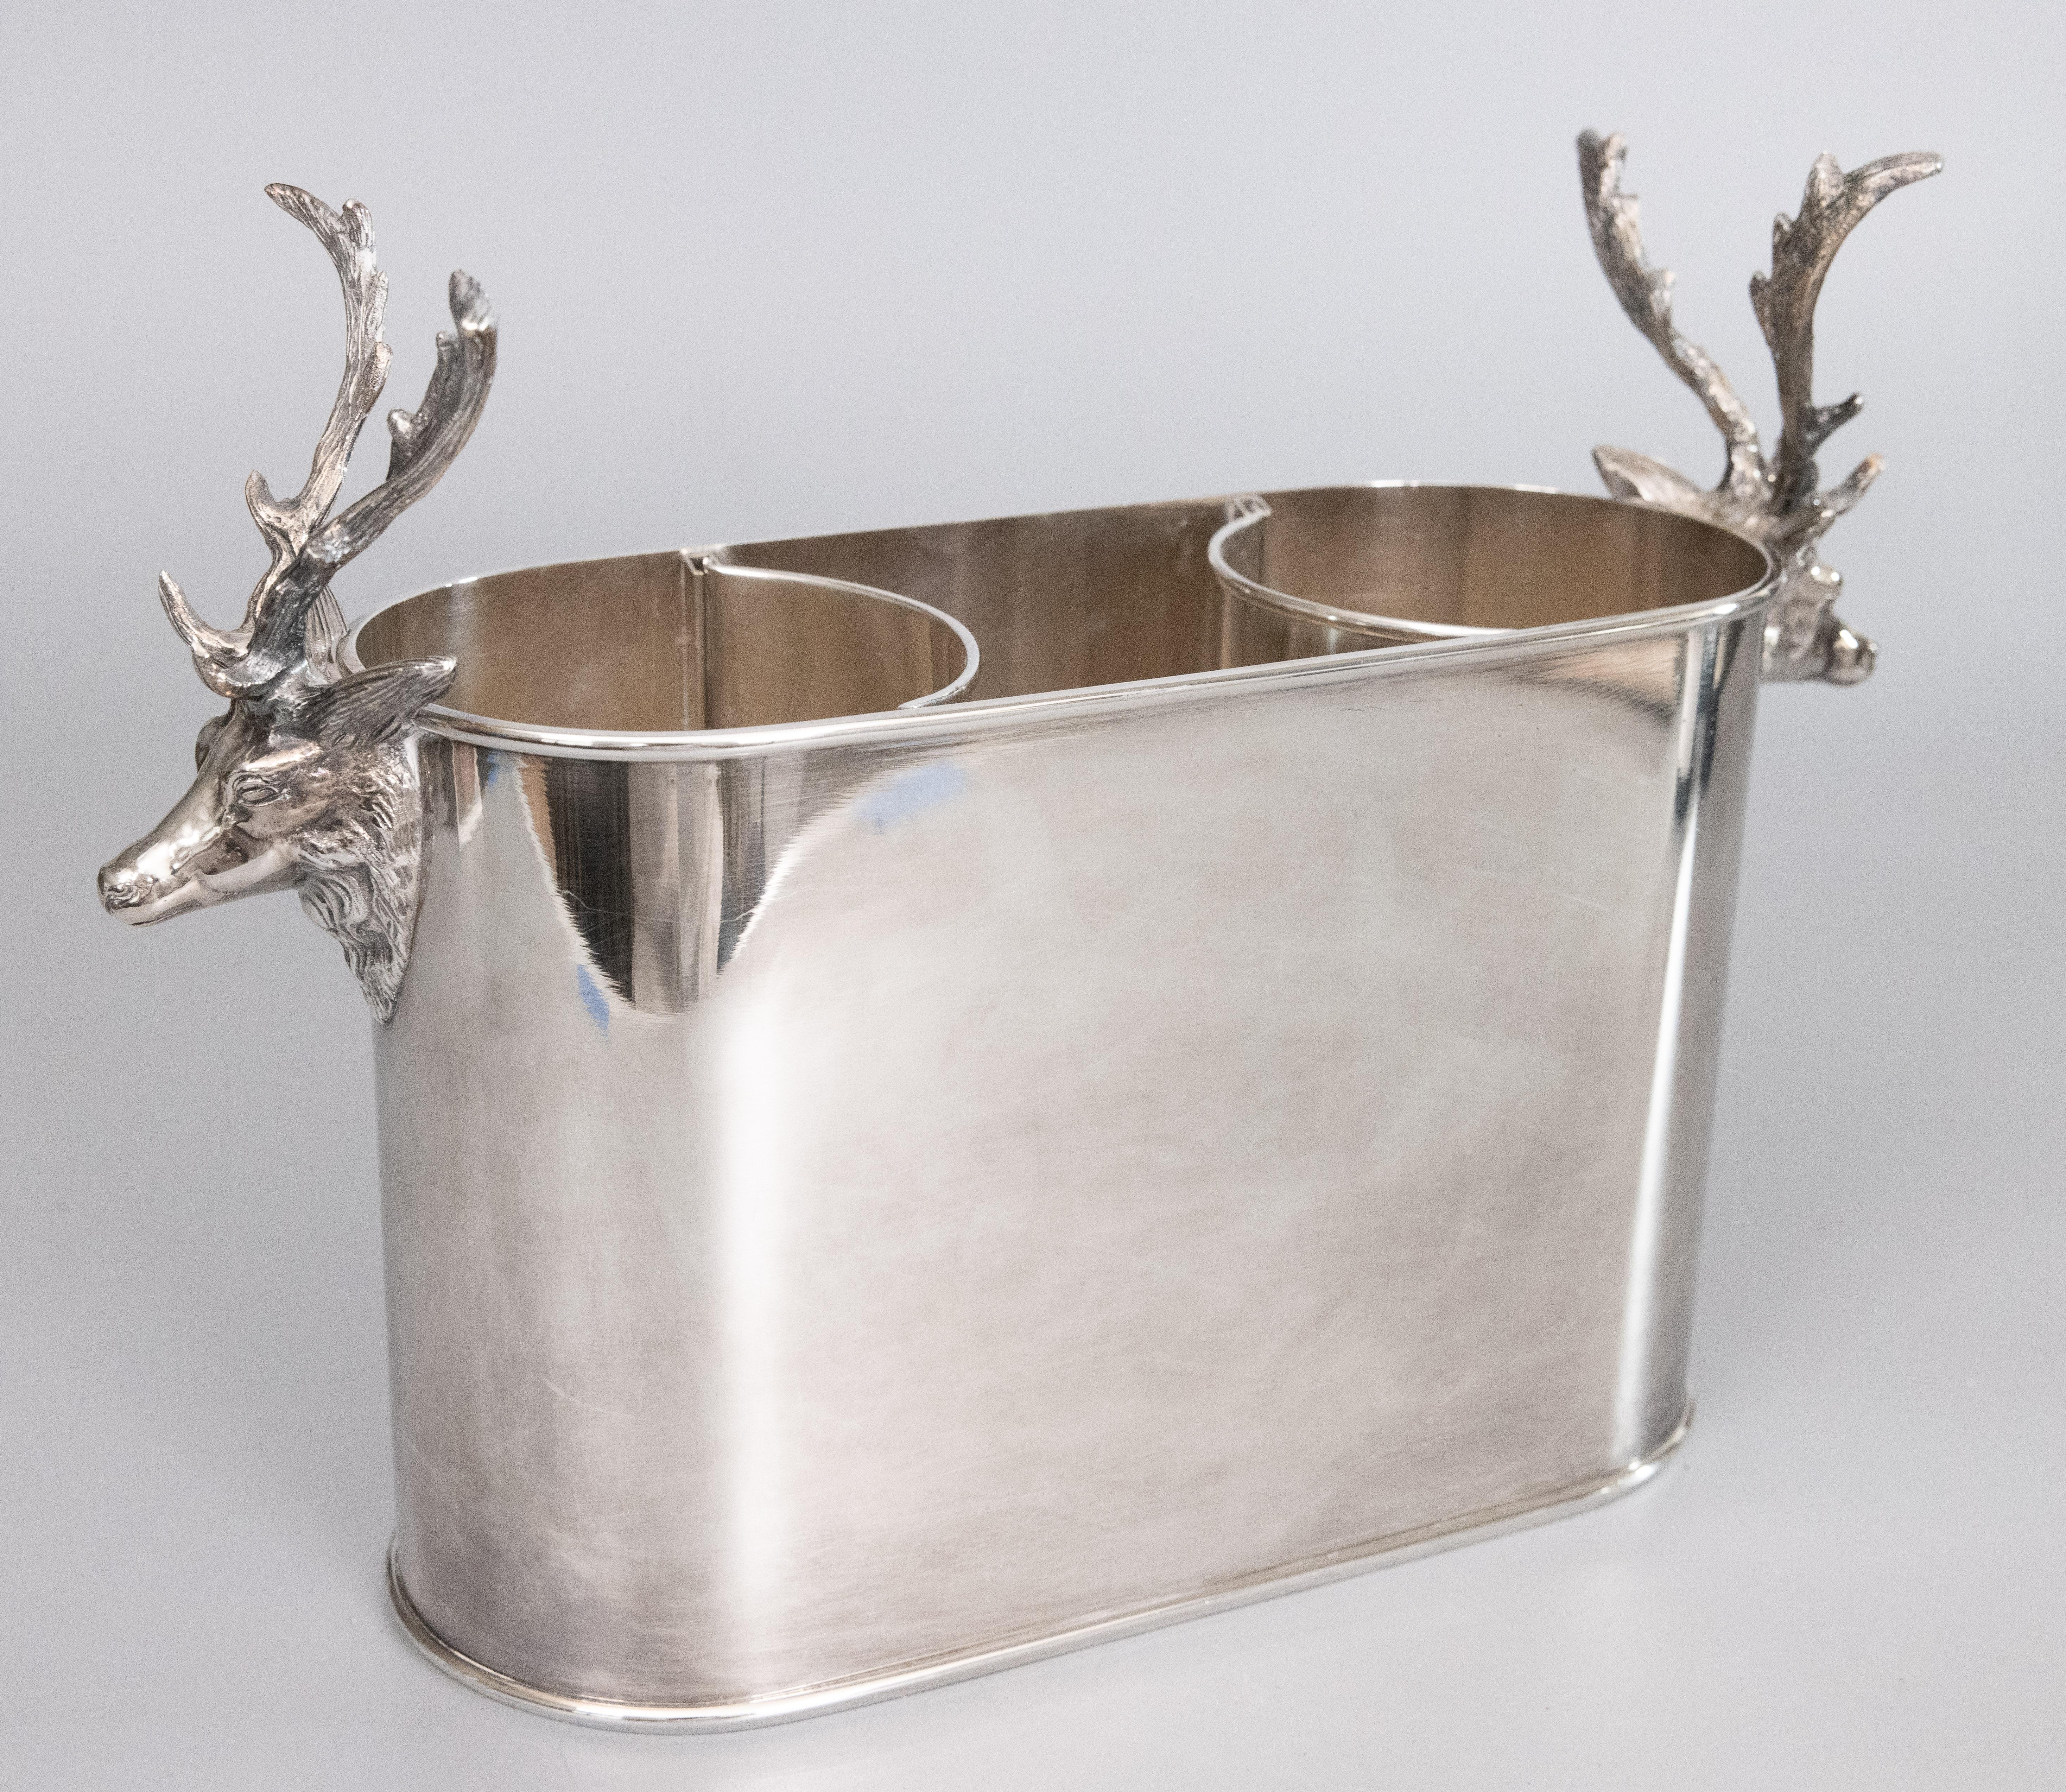 A fabulous Italian silver plated double champagne ice bucket or wine cooler with stag / elk head handles, circa 1960. Marked 